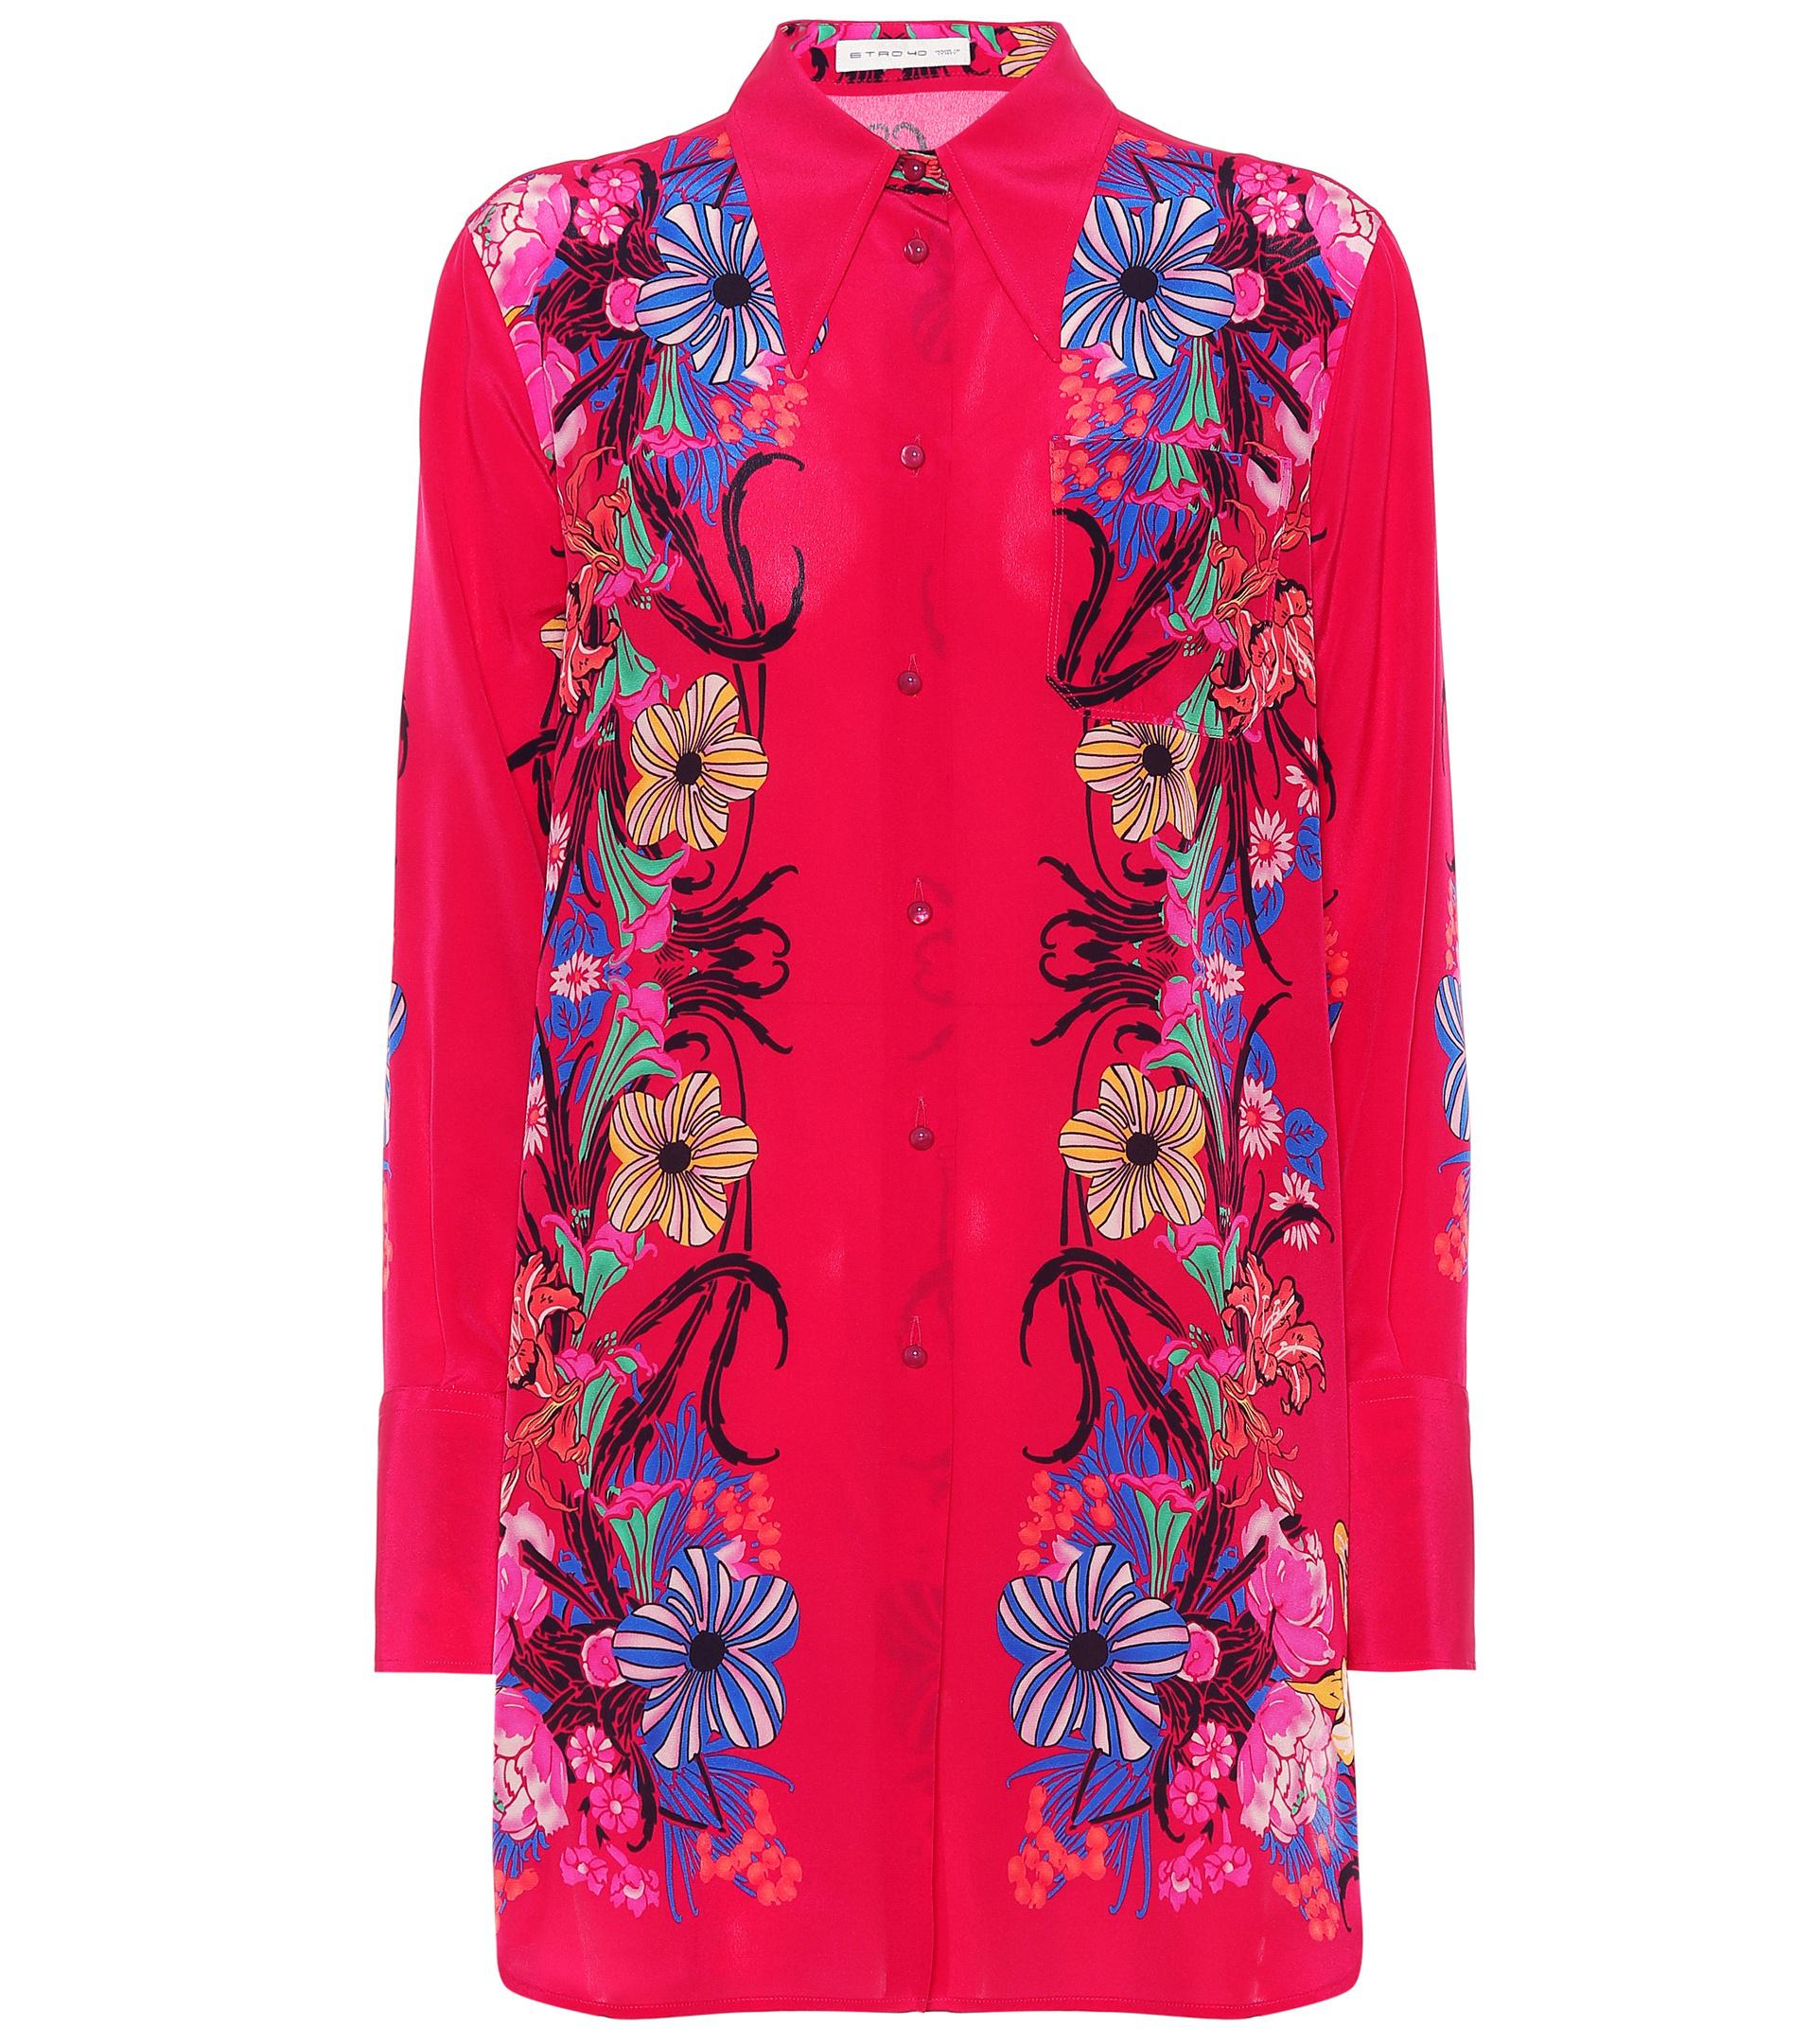 Etro Floral Silk Tunic Blouse in Pink - Lyst